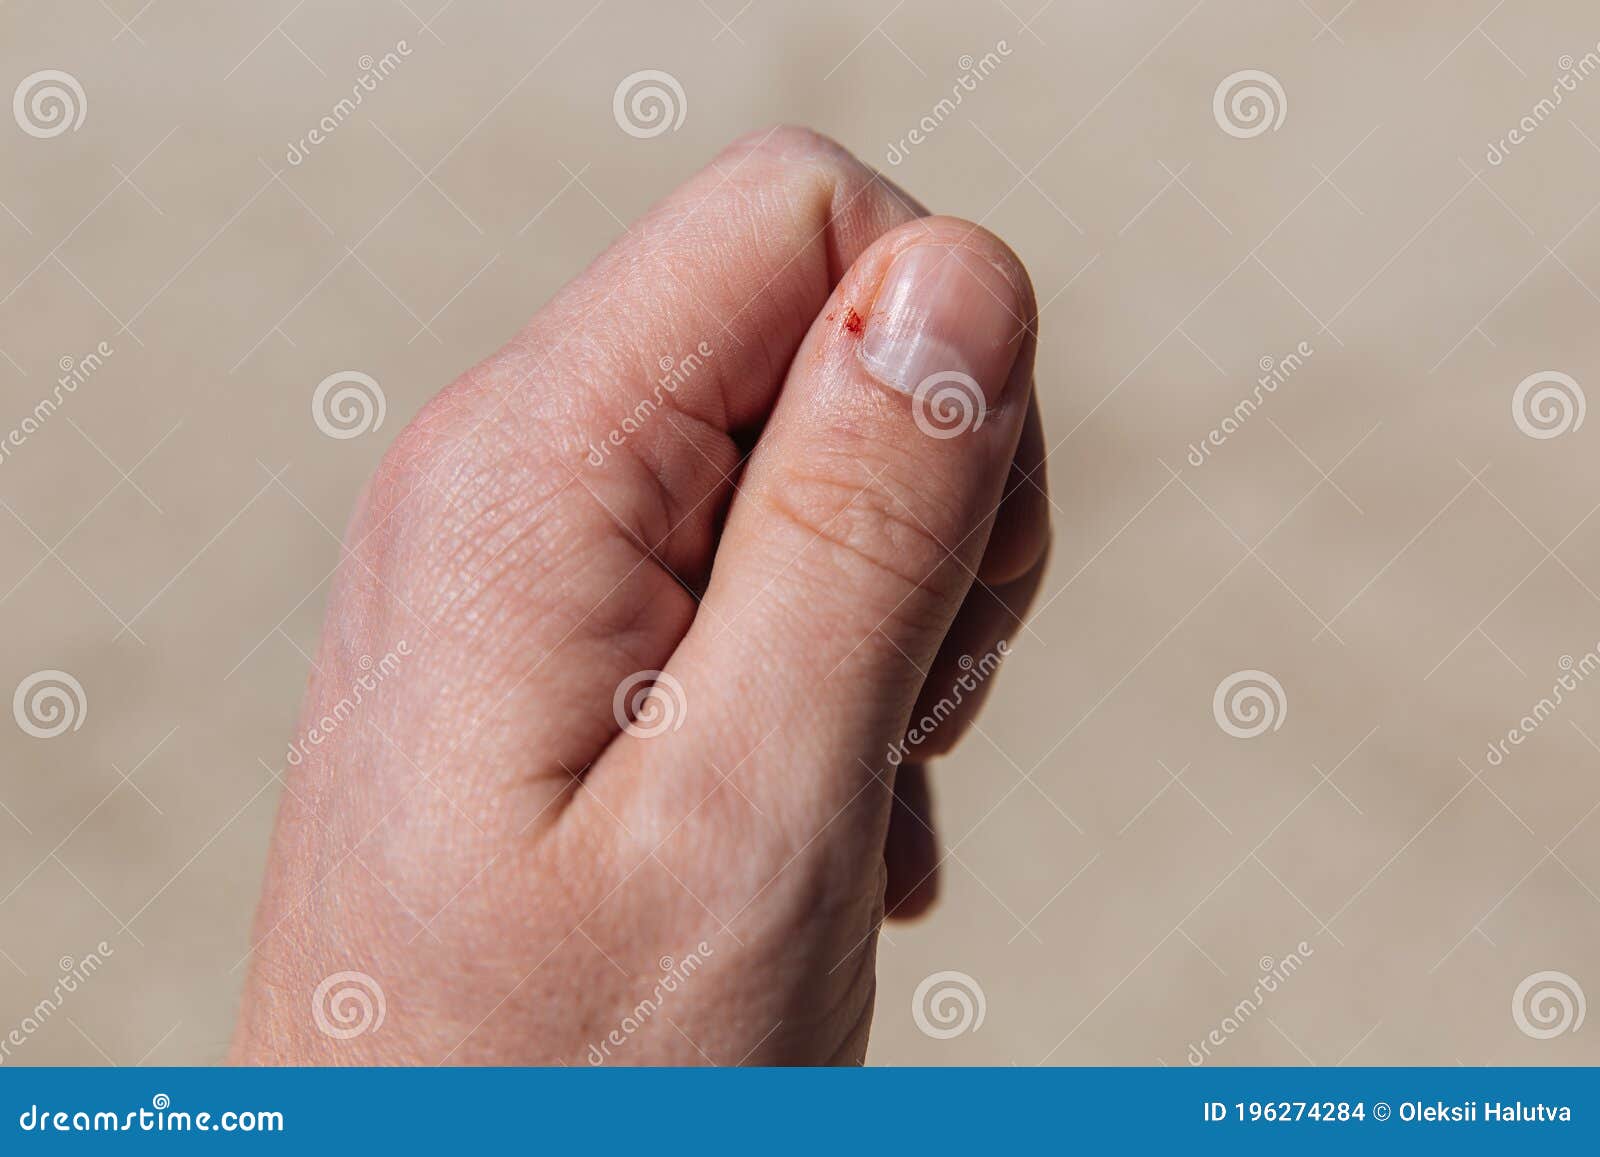 Are there any treatments for the skin beneath toe nails bleeding after  being cut? (Photo) - human